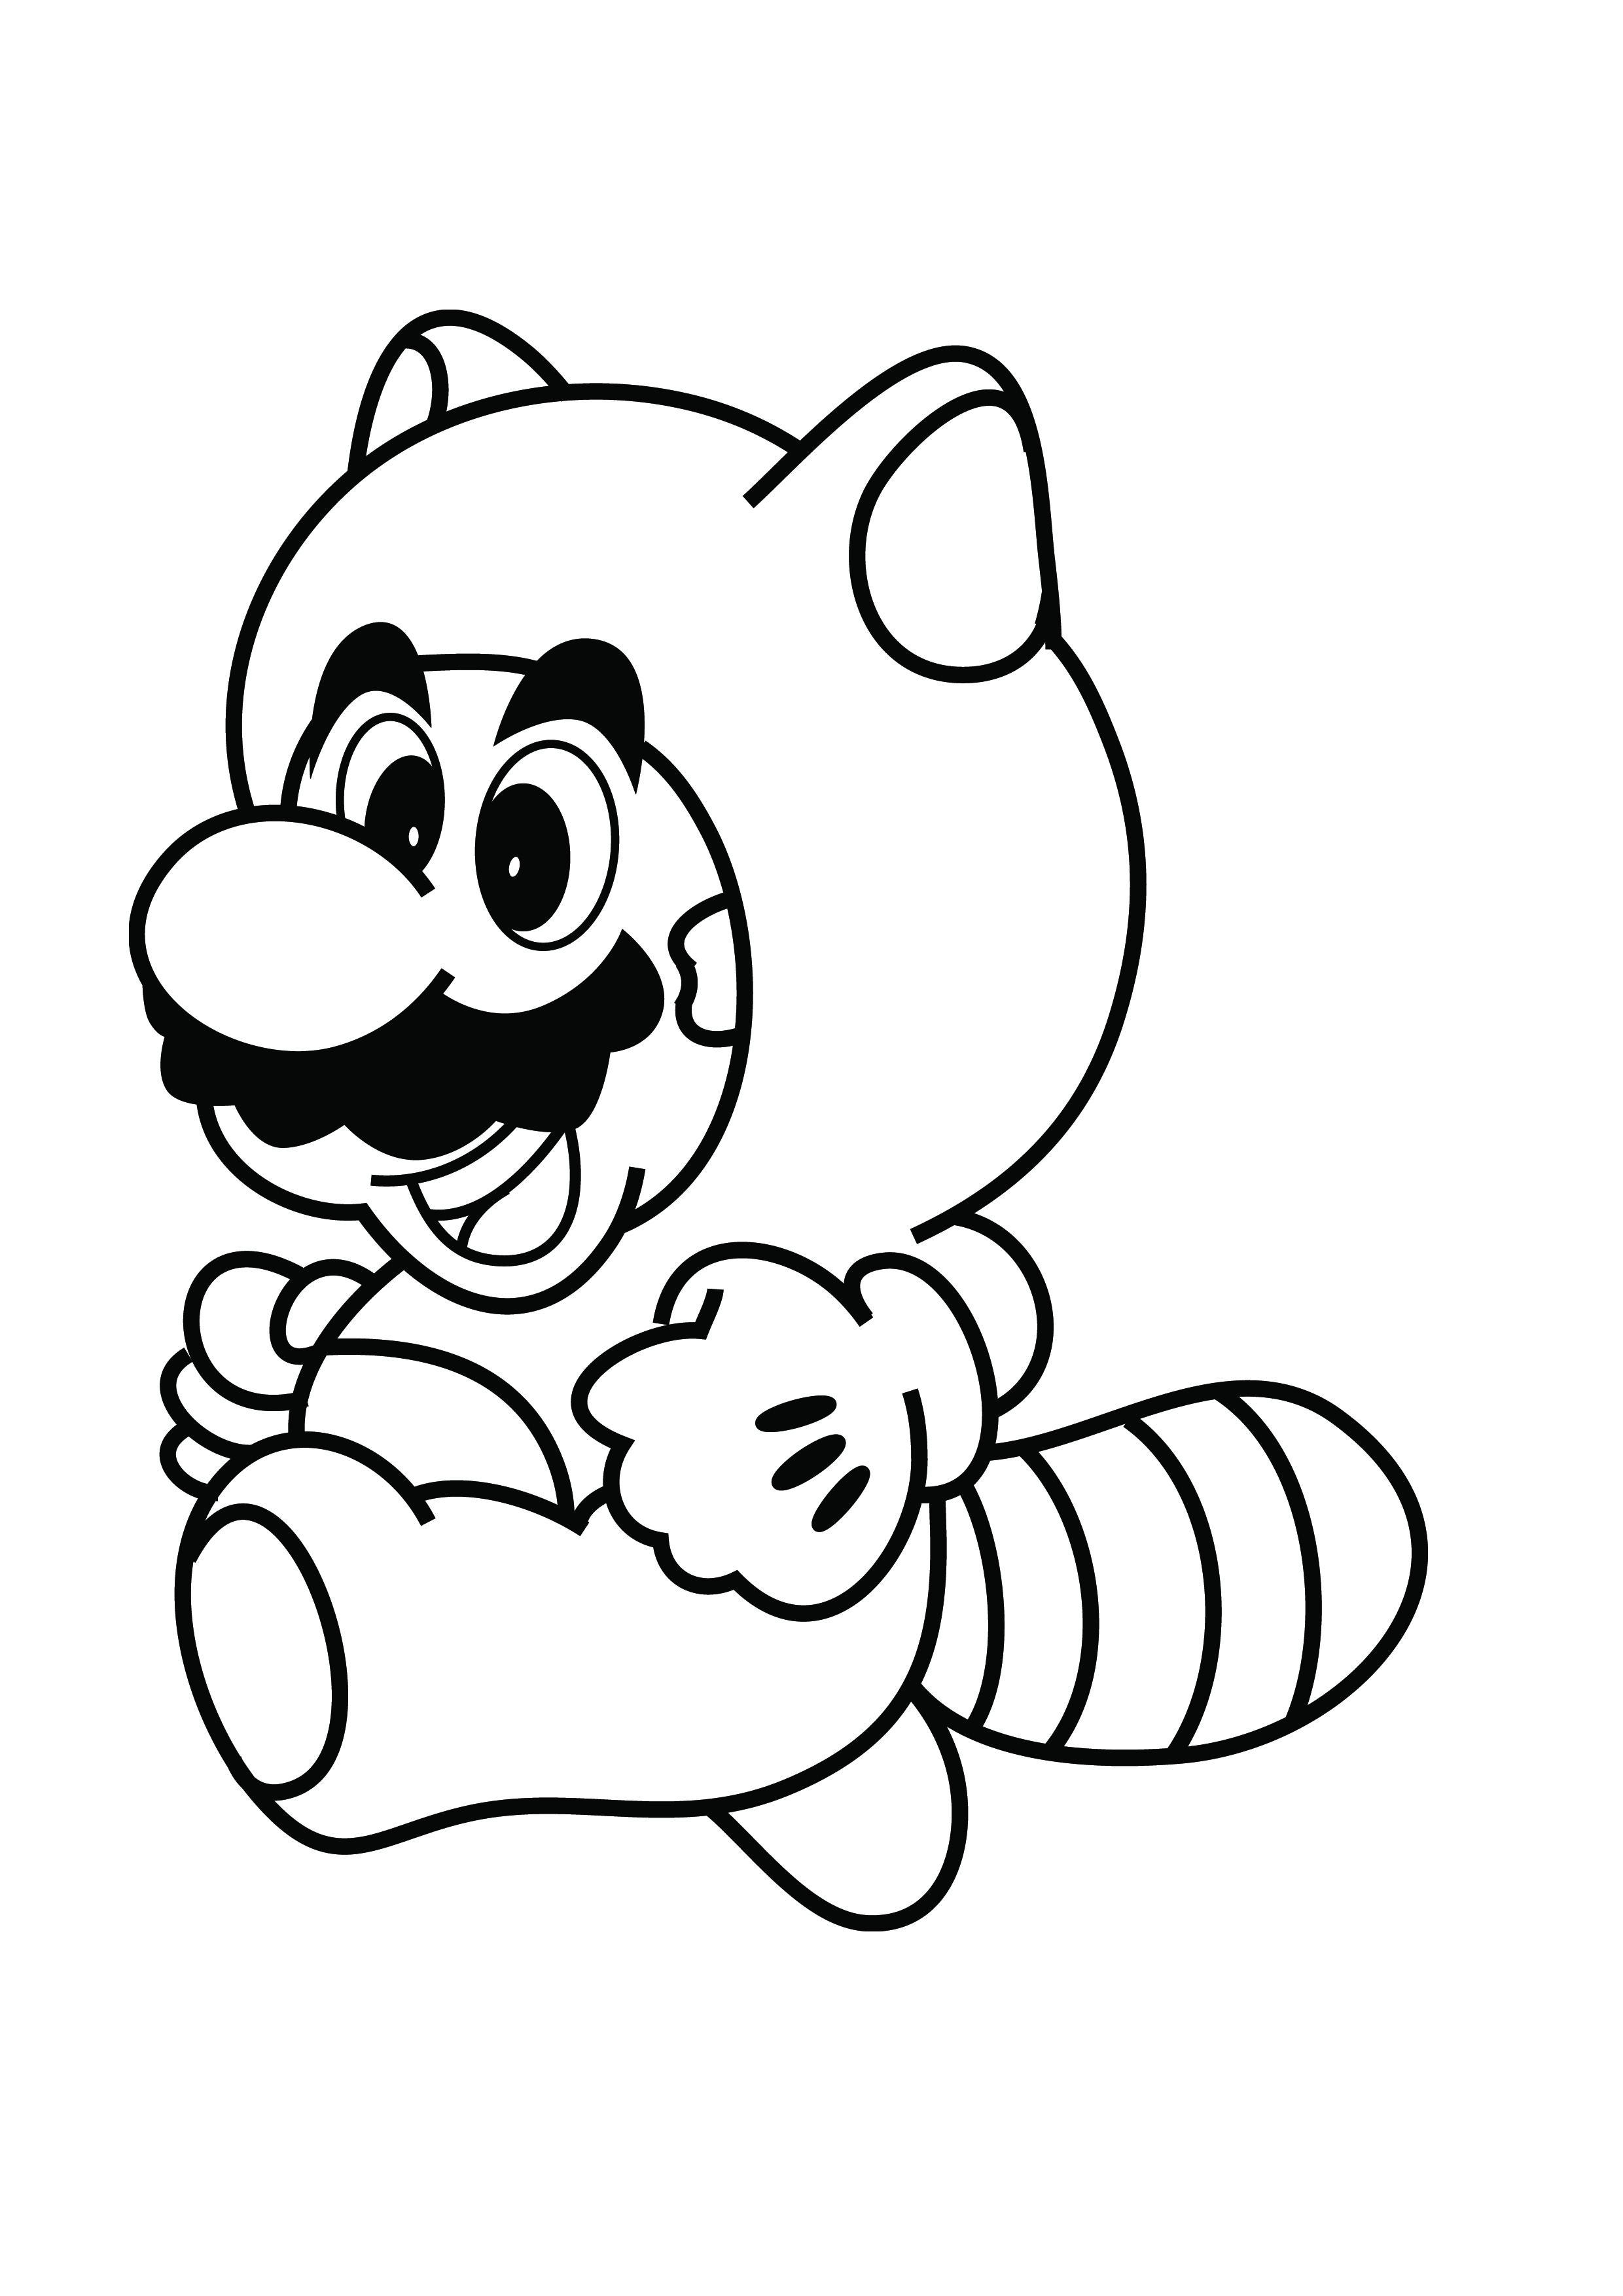 super-mario-coloring-pages-best-coloring-pages-for-kids